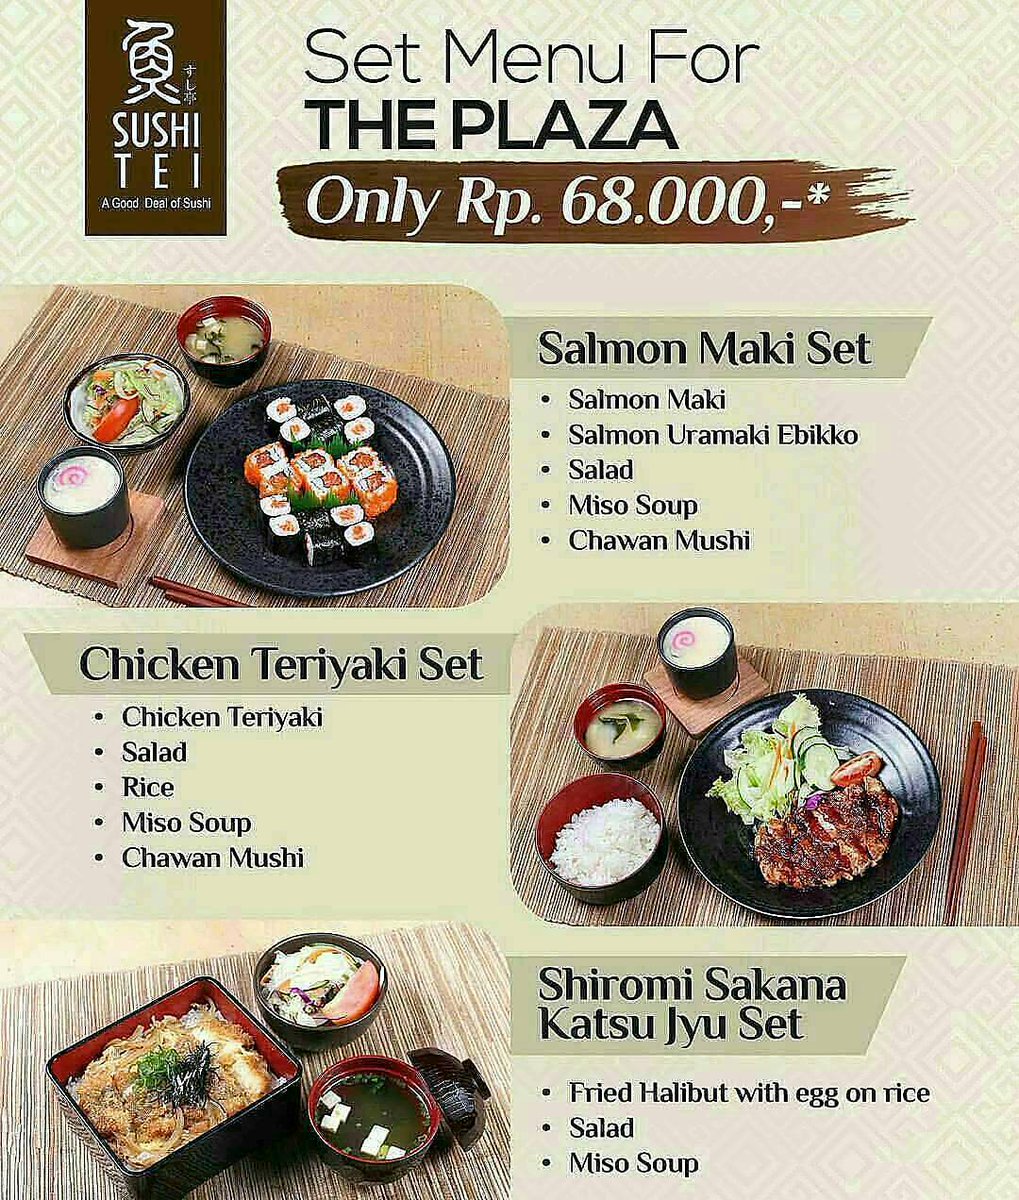 Sushi Tei Indonesia on Twitter: "Set menu THE PLAZA only @ Plaza